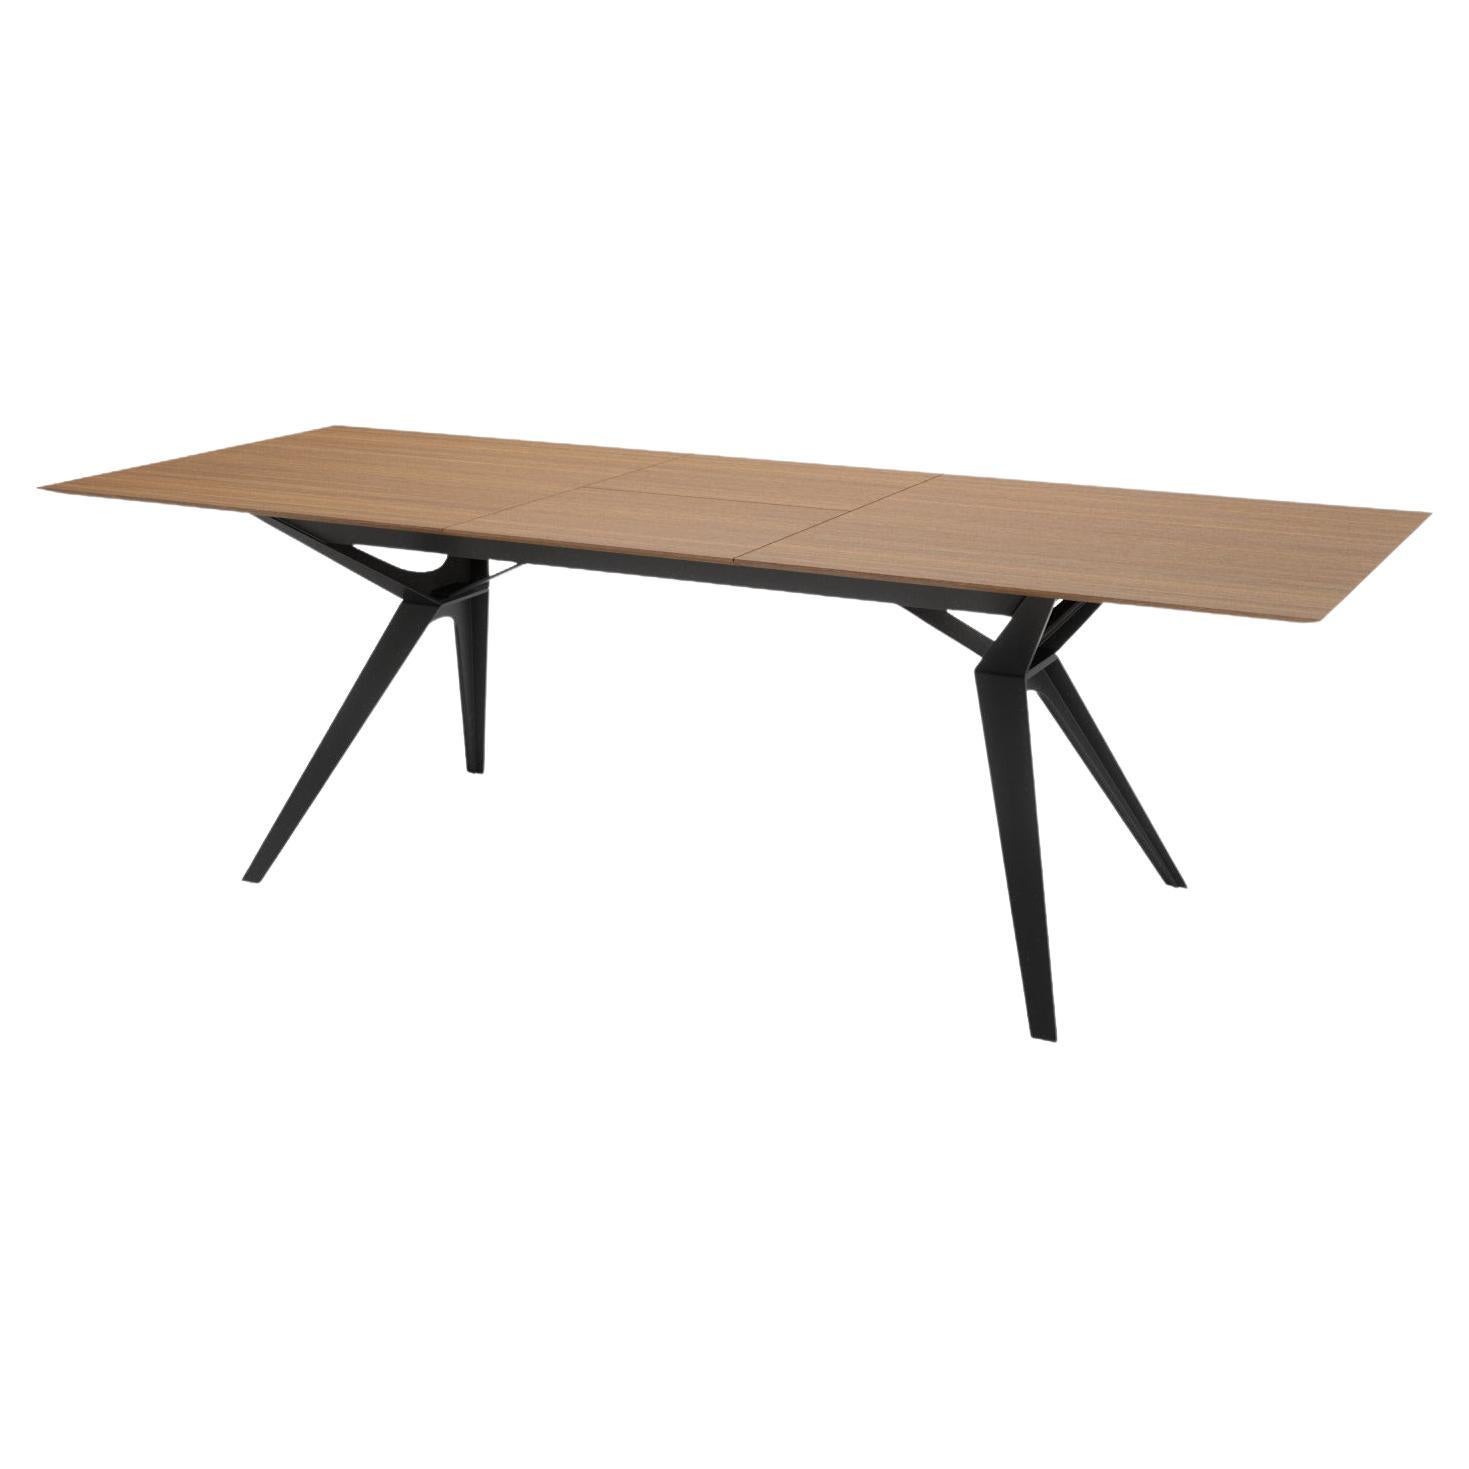 Piana Table 4 Feet 200cm 1x60cm Butterfly Leaf Exntensions